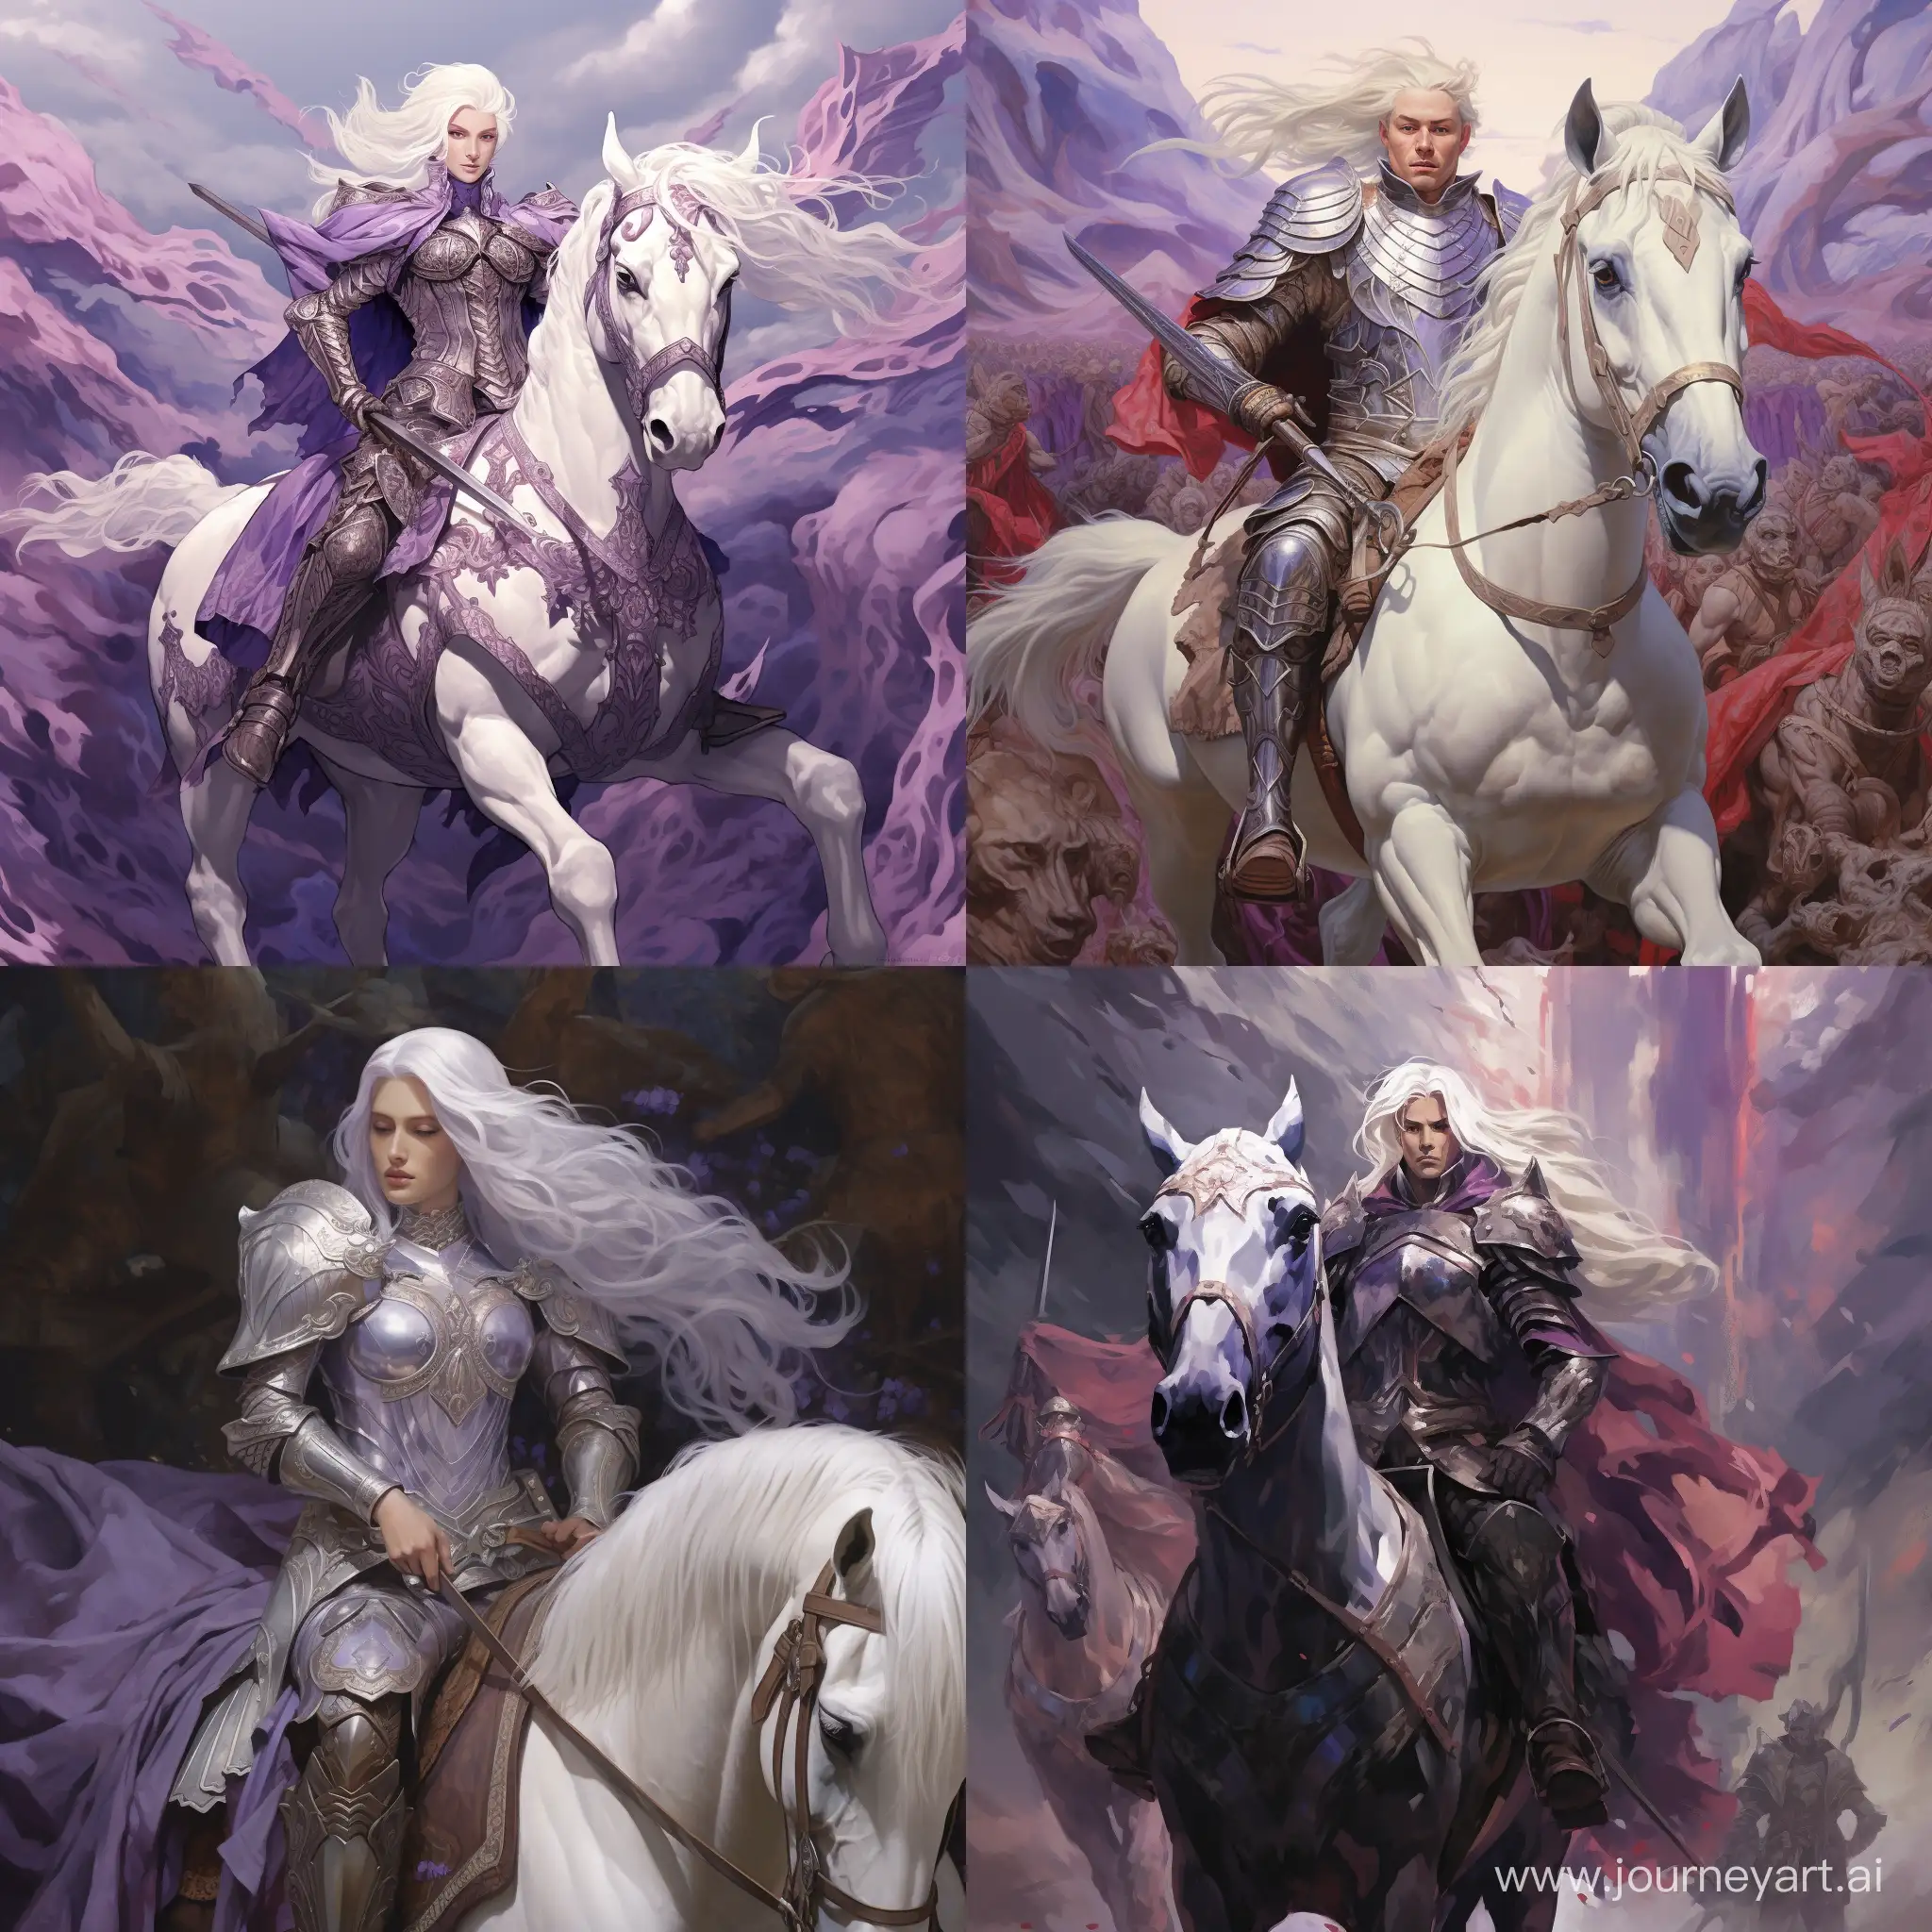 Formidable-Knight-with-Piercing-Purple-Eyes-Riding-a-Bloodied-Horse